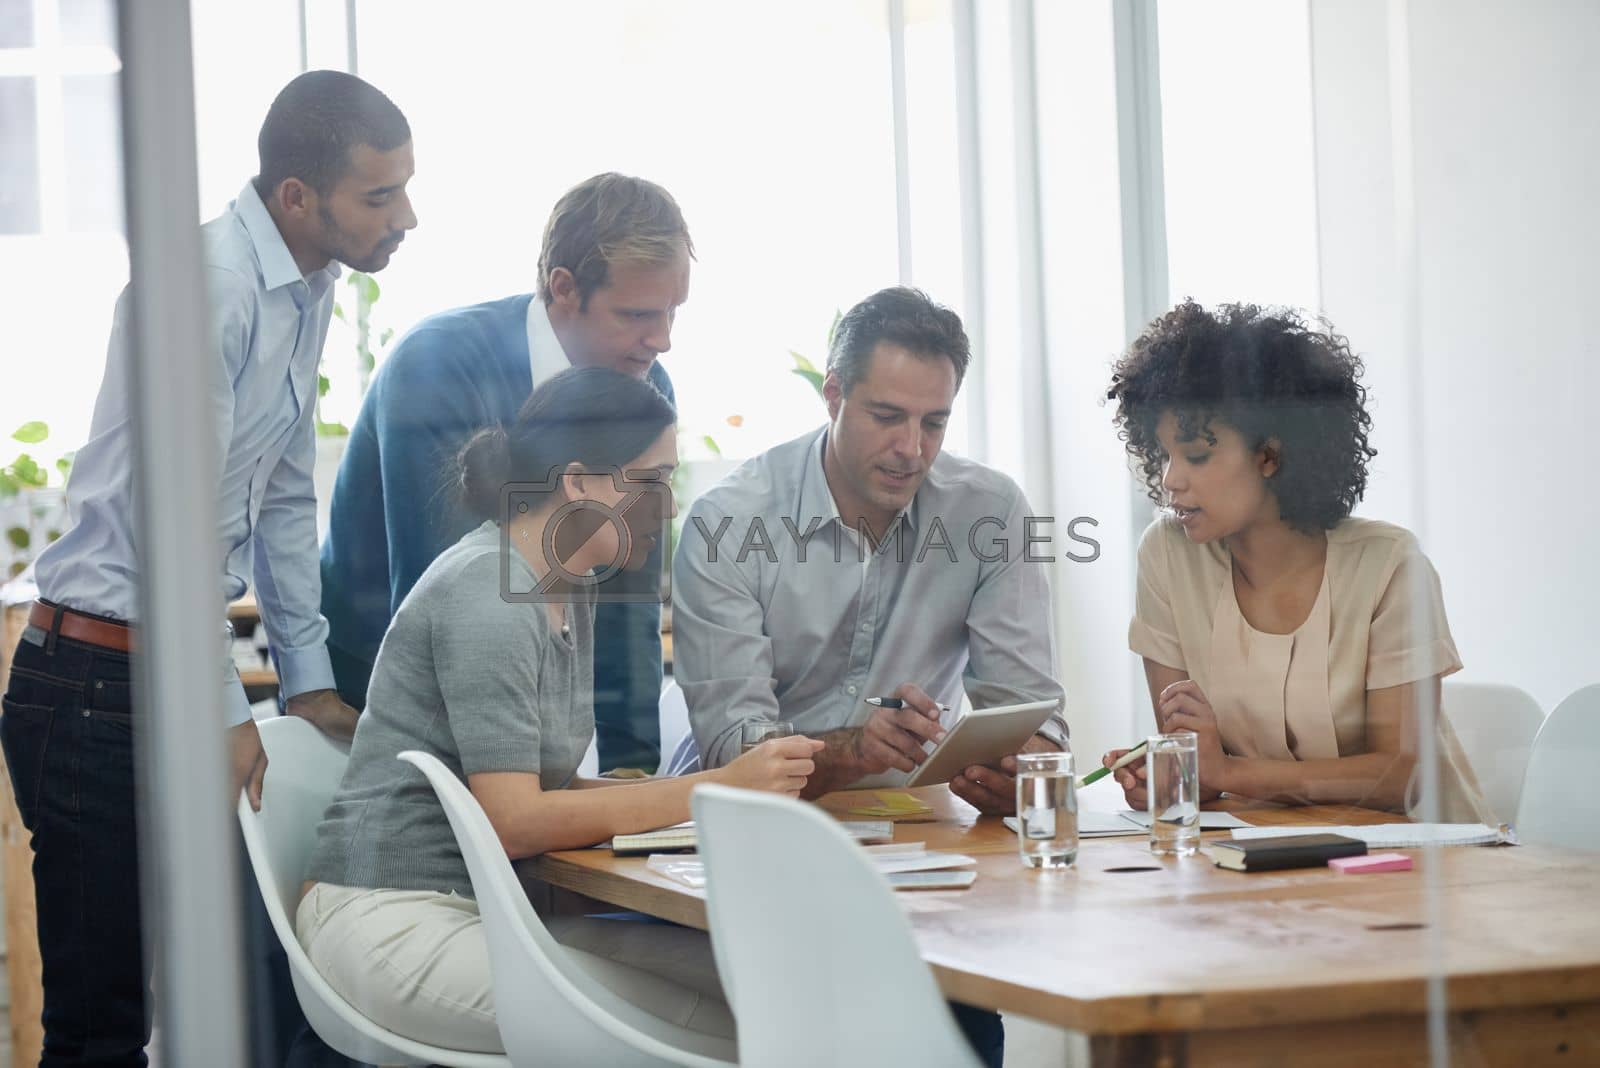 Royalty free image of We do extraordinary every day. a group of professionals using wireless technology during a meeting. by YuriArcurs